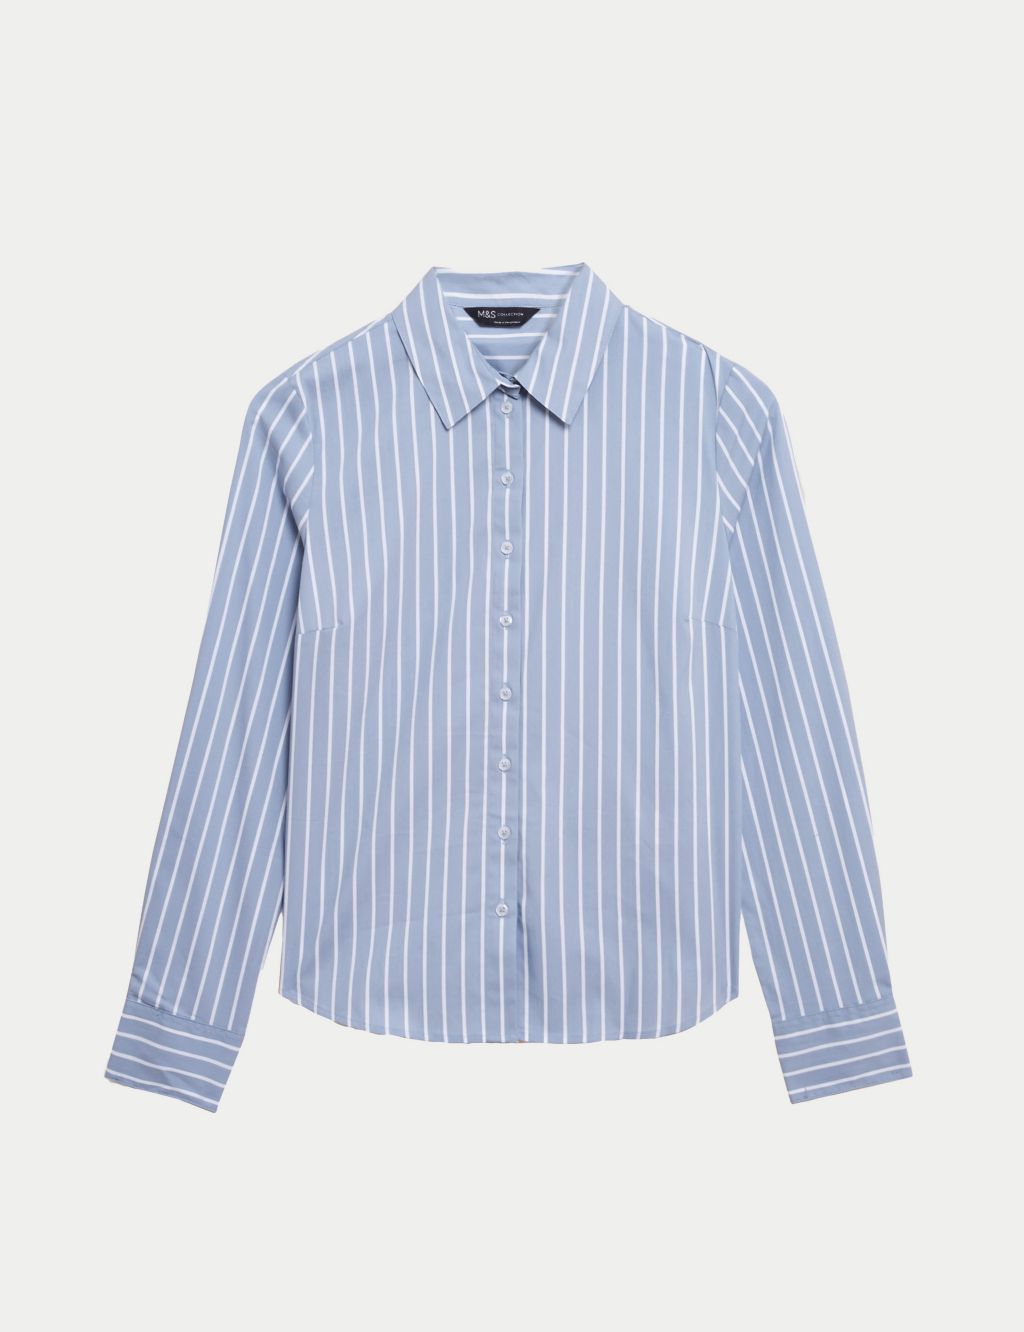 Cotton Rich Striped Fitted Shirt image 2